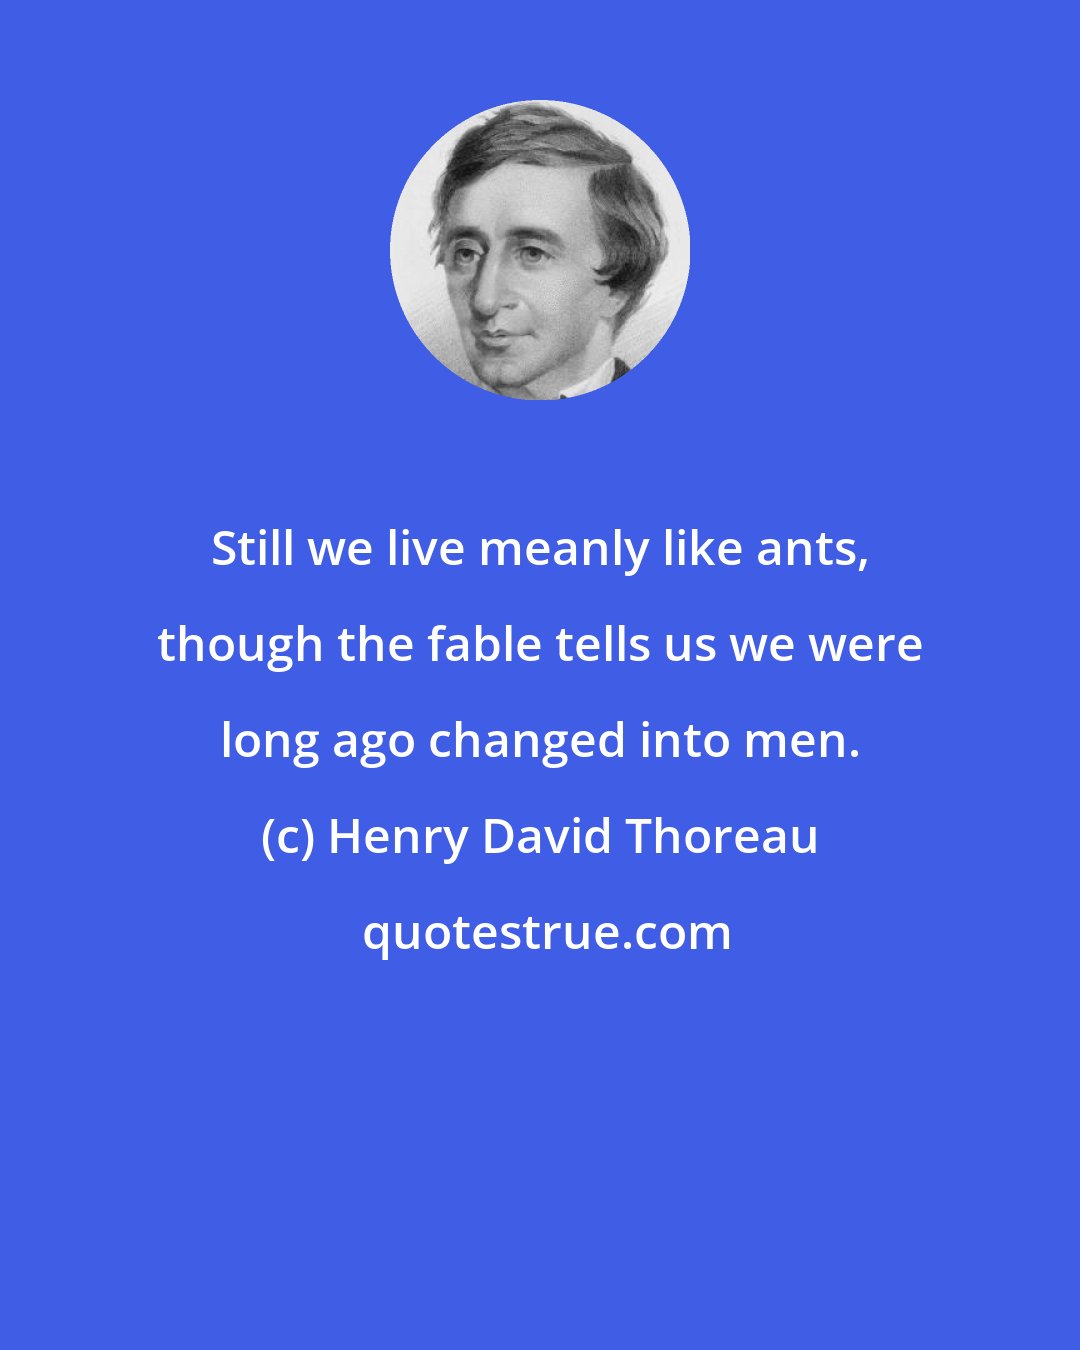 Henry David Thoreau: Still we live meanly like ants, though the fable tells us we were long ago changed into men.